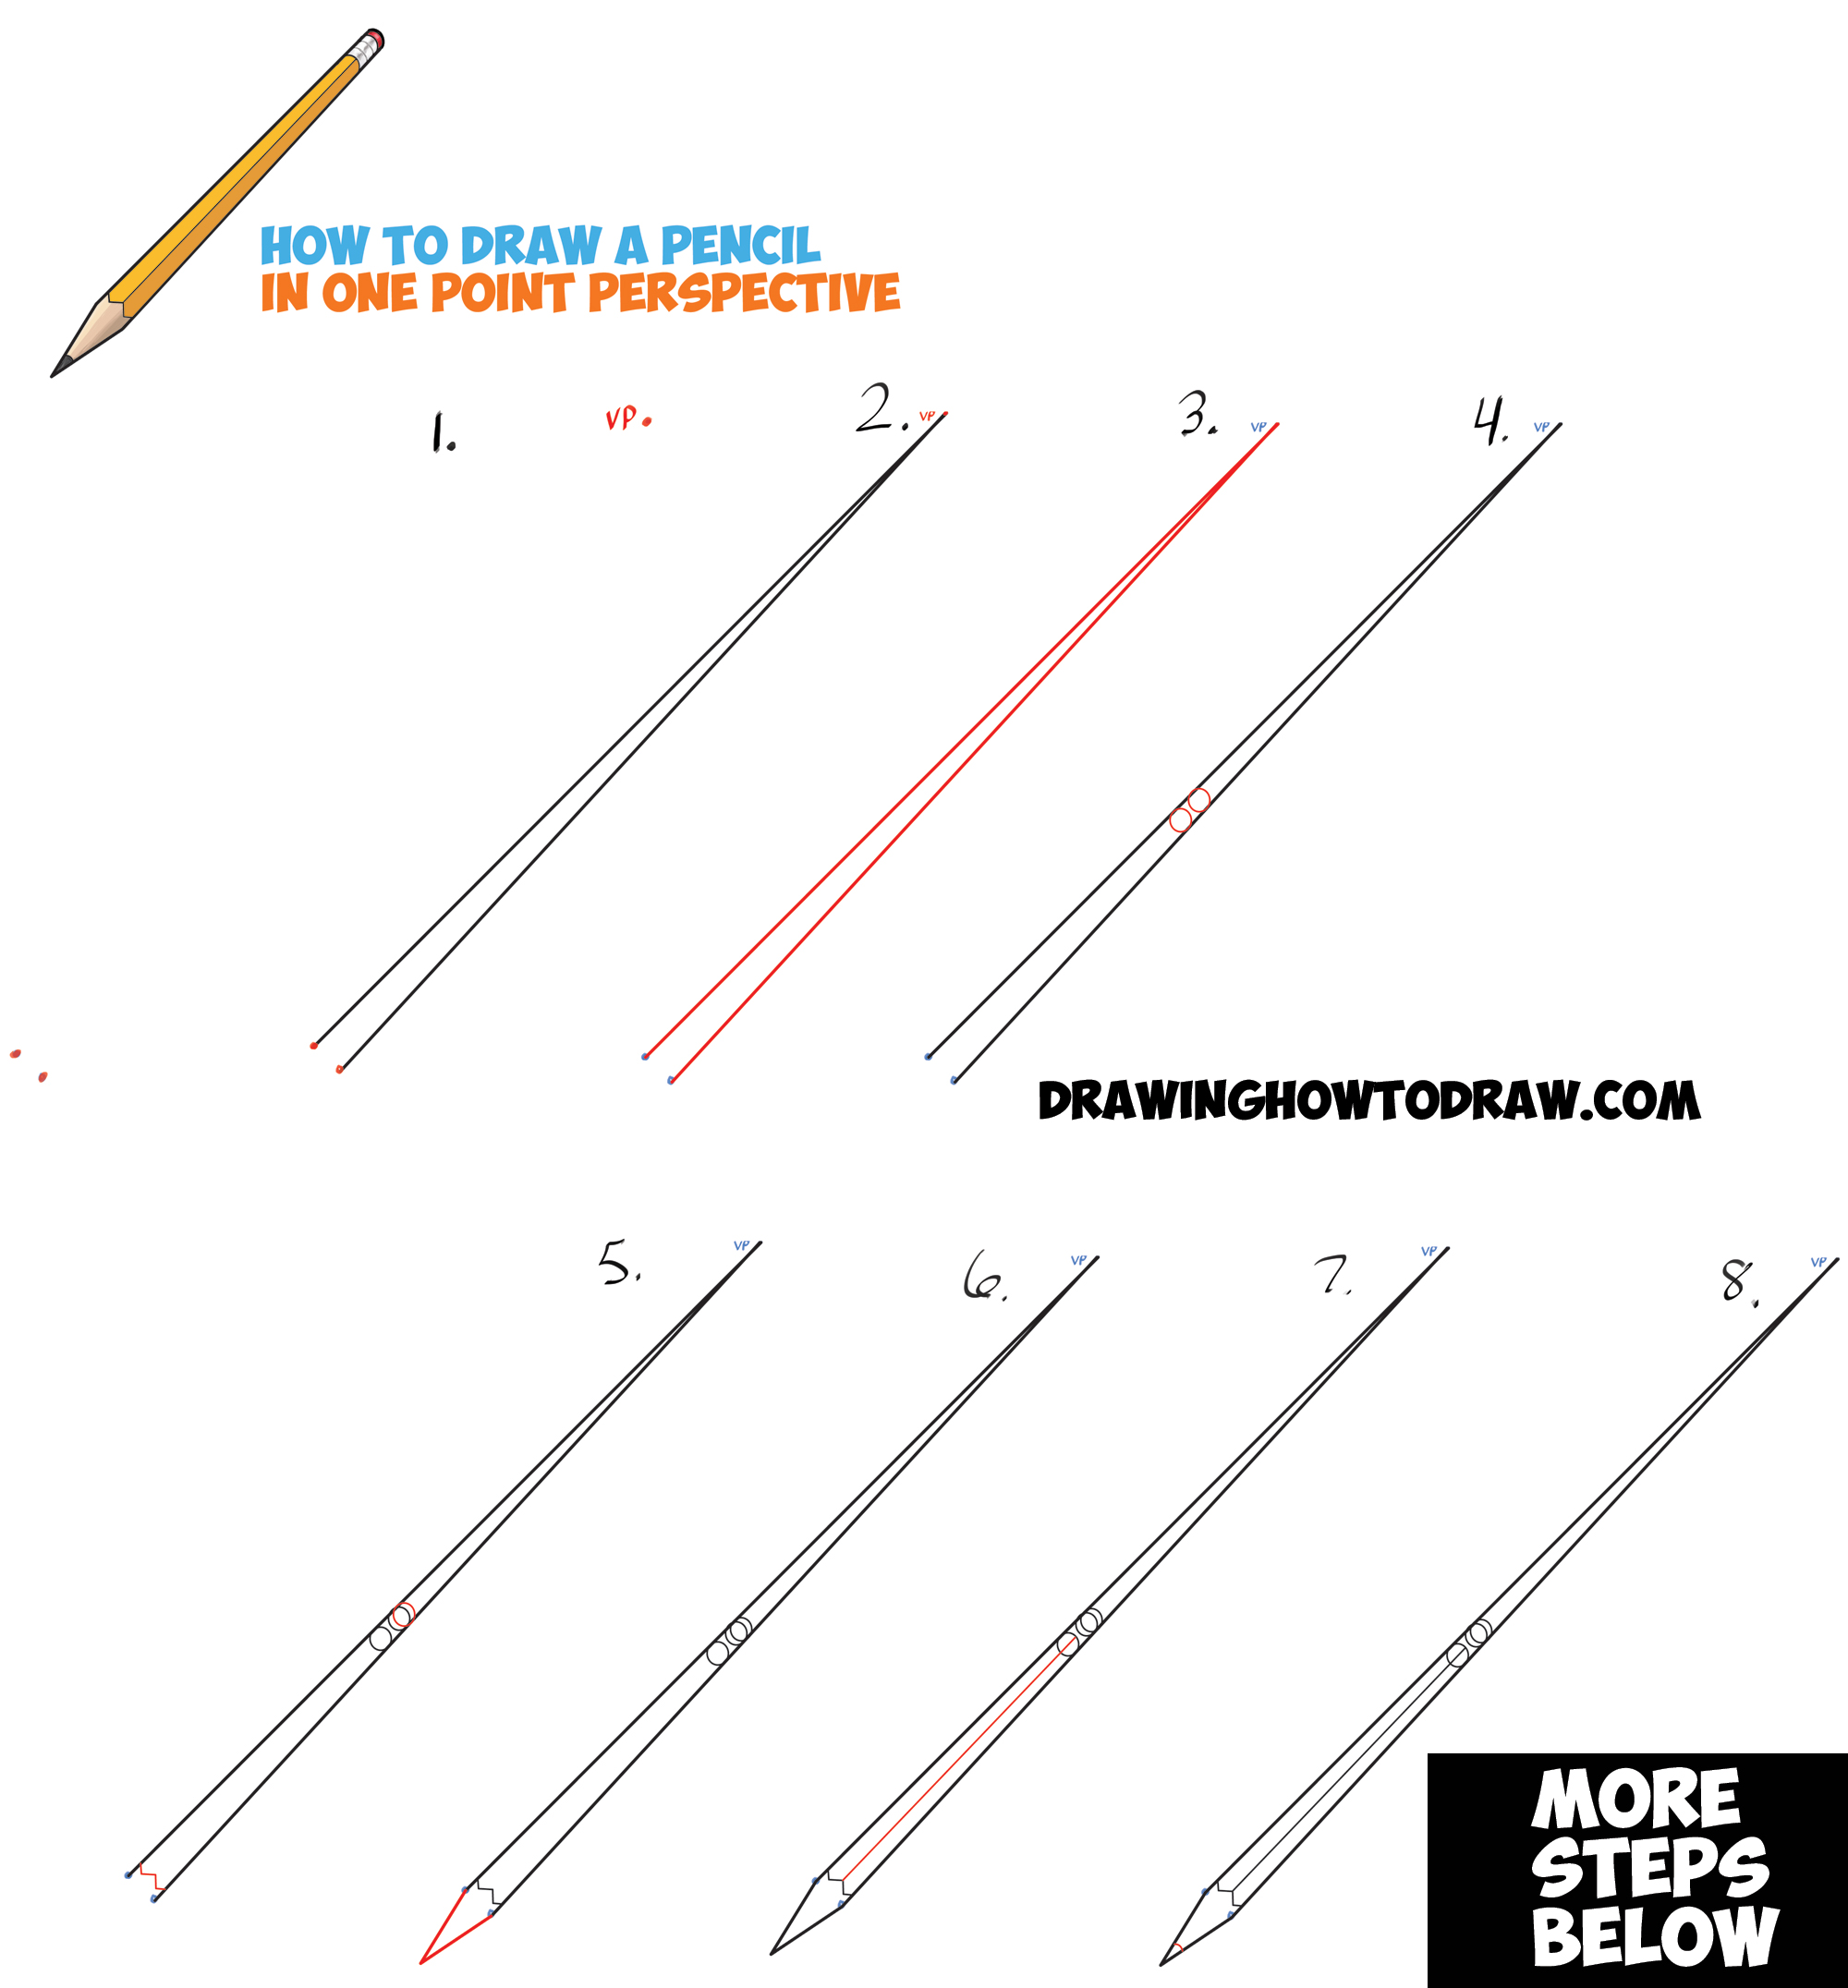 How to Draw Realistic Pencils Using One Point Perspective Techniques - Easy Step by Step Drawing Tutorial